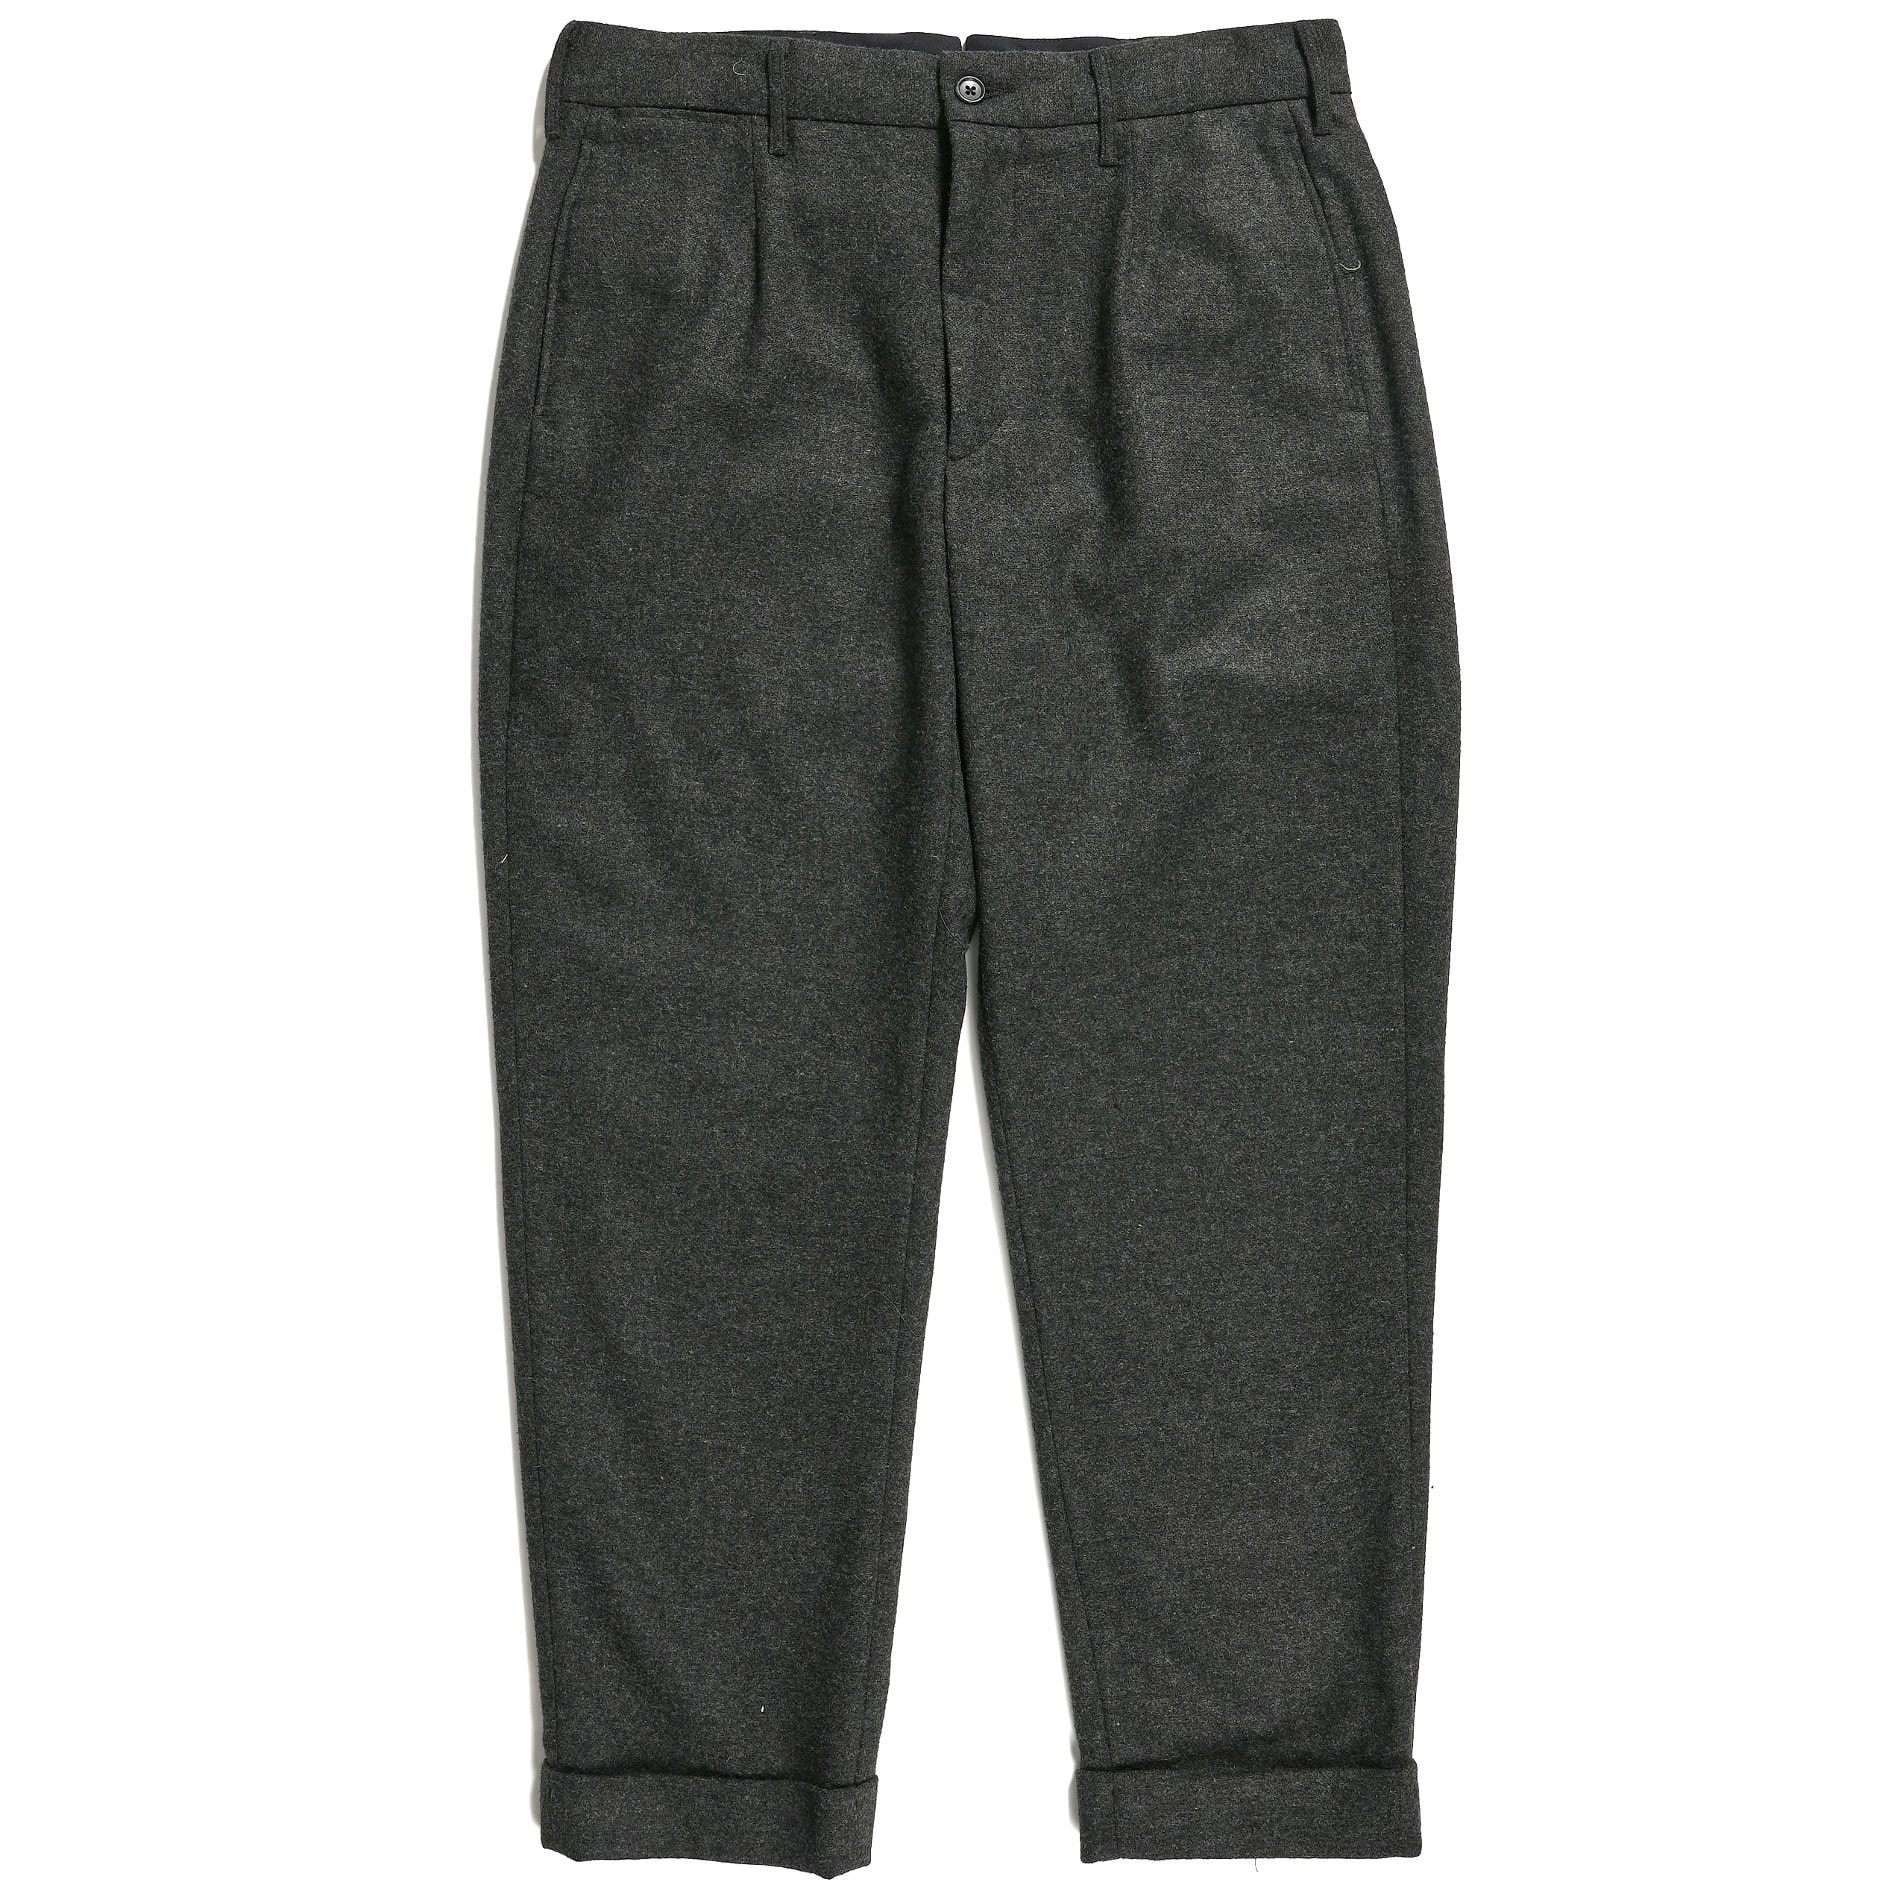 ENGINEERED GARMENTS ANDOVER PANT GREY SOLID POLY WOOL FLANNEL